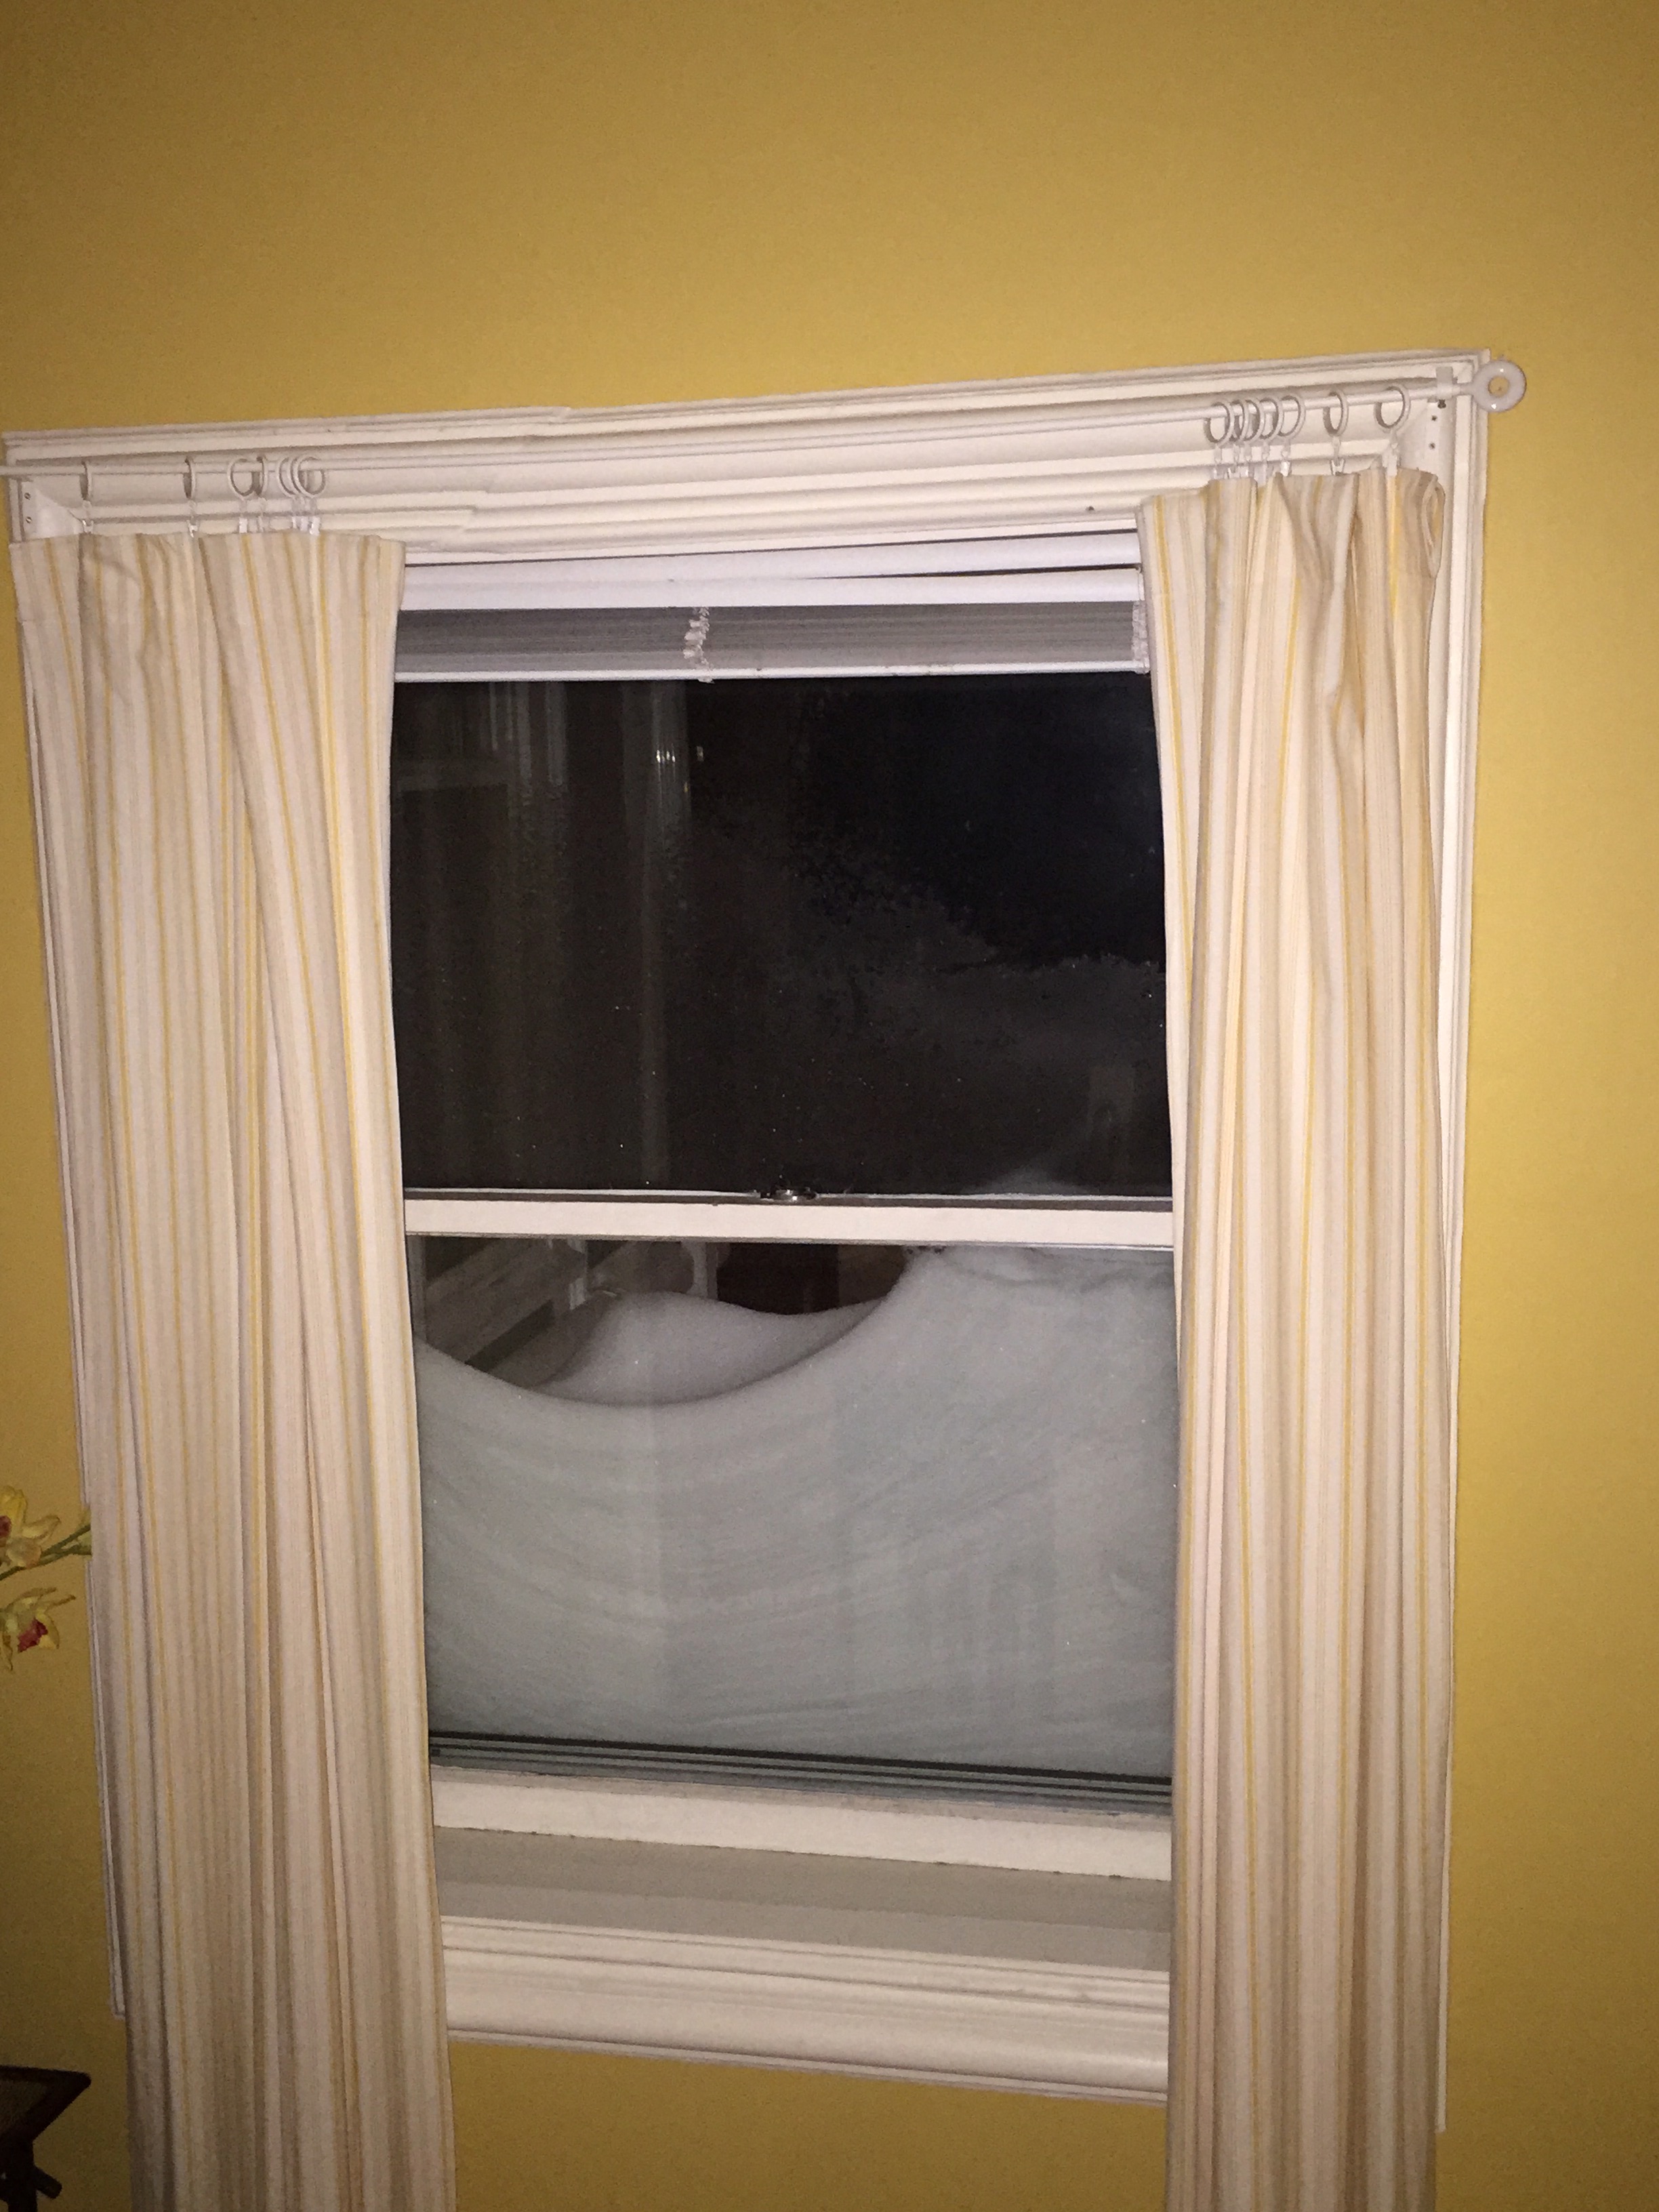 Half of the window frame is covered in snow